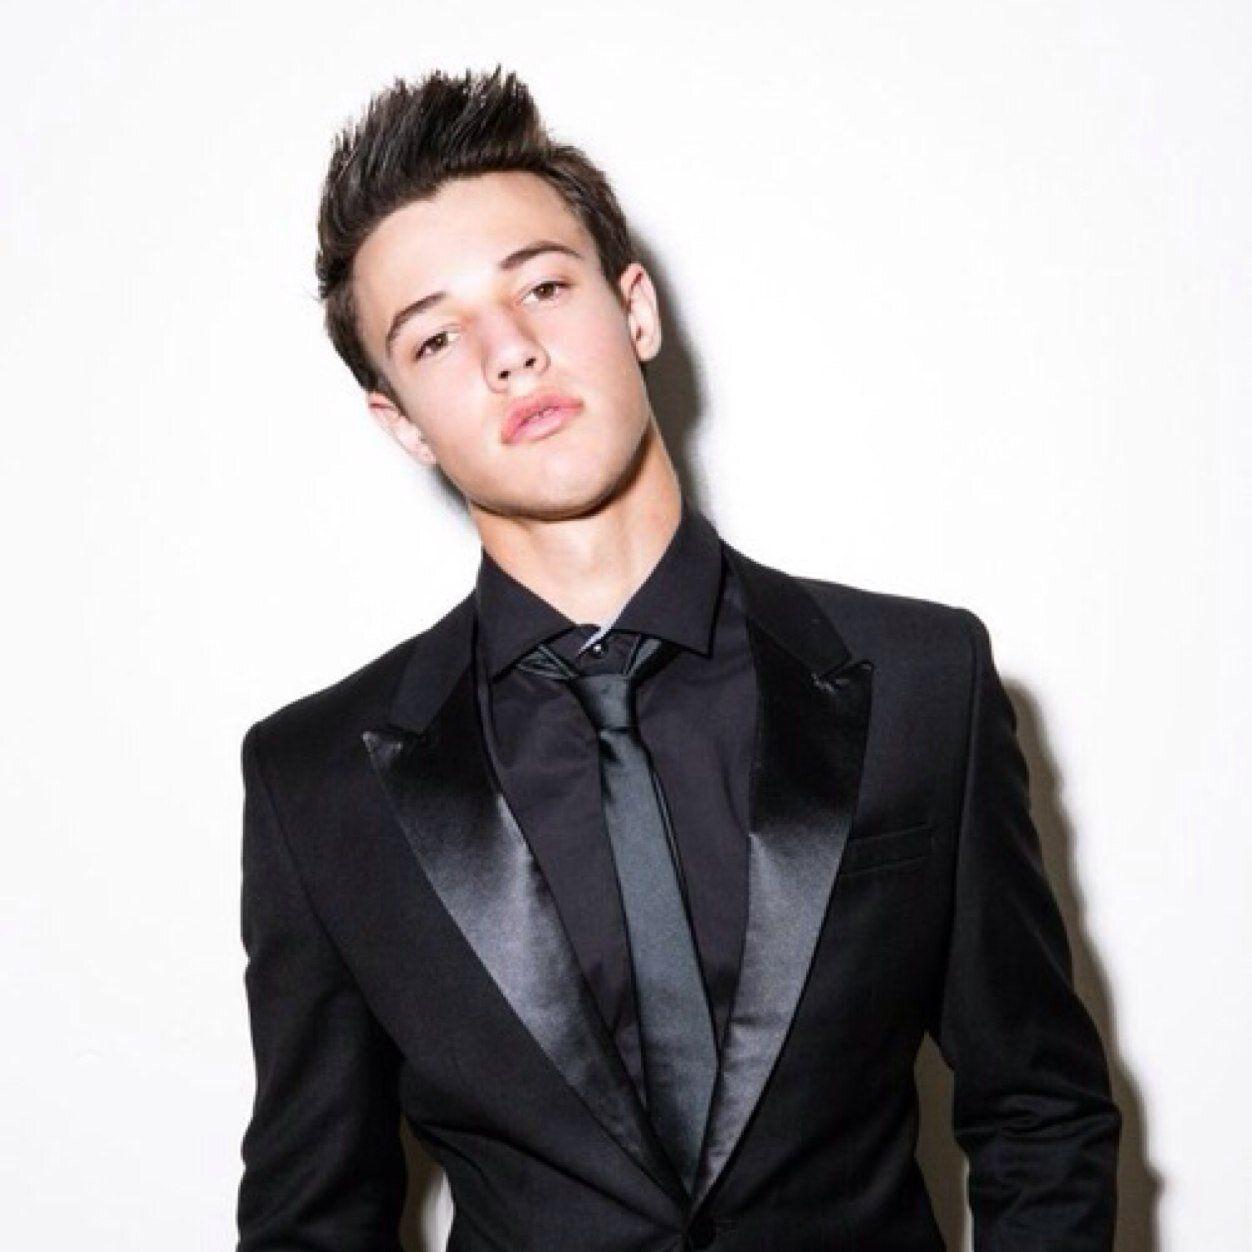 Best image about cameron dallas. Happy new year